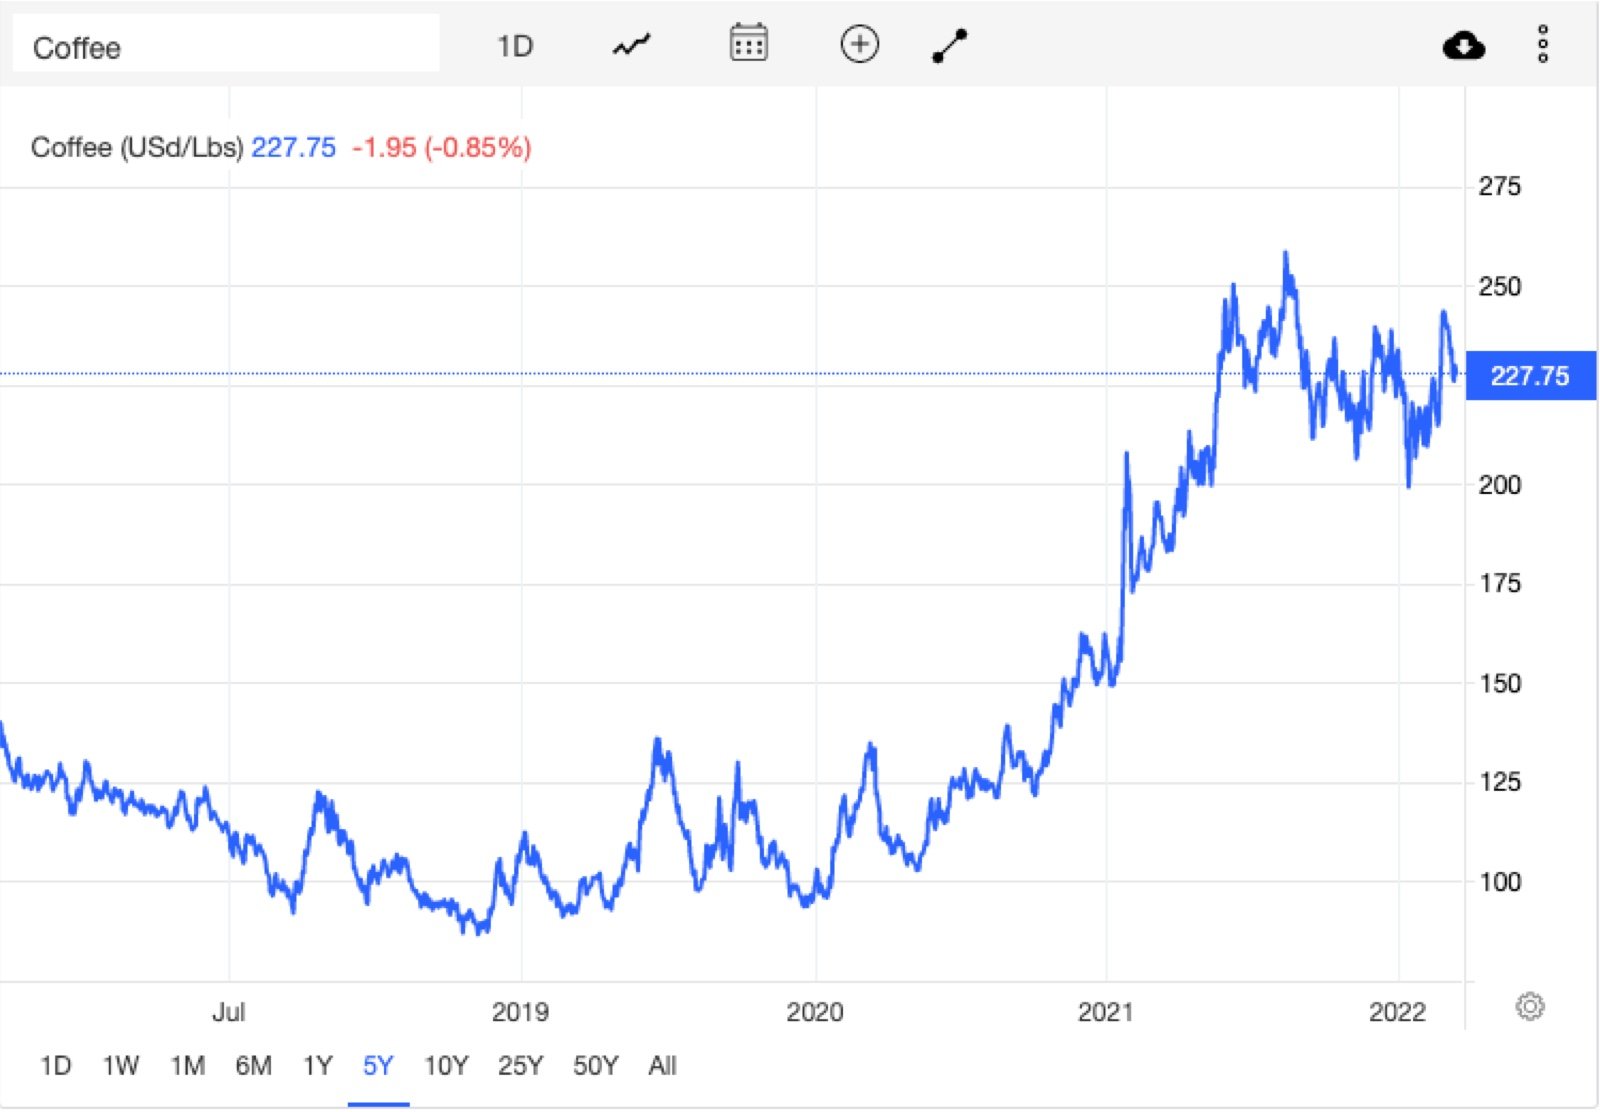 International Coffee Prices over the past 5 years